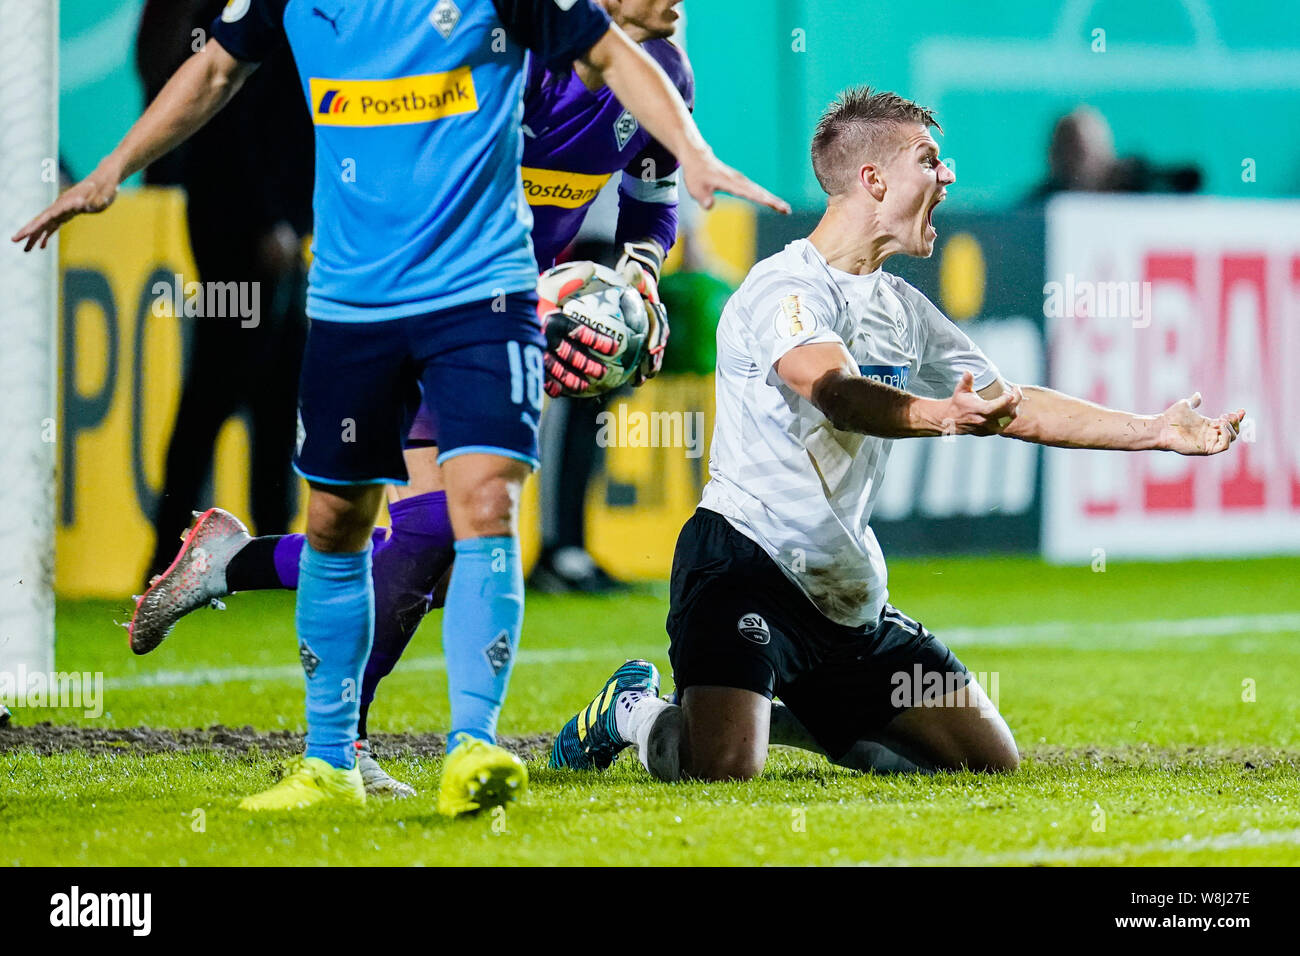 Sandhausen, Germany. 09th Aug, 2019. Soccer: DFB Cup, SV Sandhausen - Borussia Mönchengladbach, 1st round, in Hardtwaldstadion. Sandhausens Kevin Behrens gesticulated. Credit: Uwe Anspach/dpa - IMPORTANT NOTE: In accordance with the requirements of the DFL Deutsche Fußball Liga or the DFB Deutscher Fußball-Bund, it is prohibited to use or have used photographs taken in the stadium and/or the match in the form of sequence images and/or video-like photo sequences./dpa/Alamy Live News Stock Photo